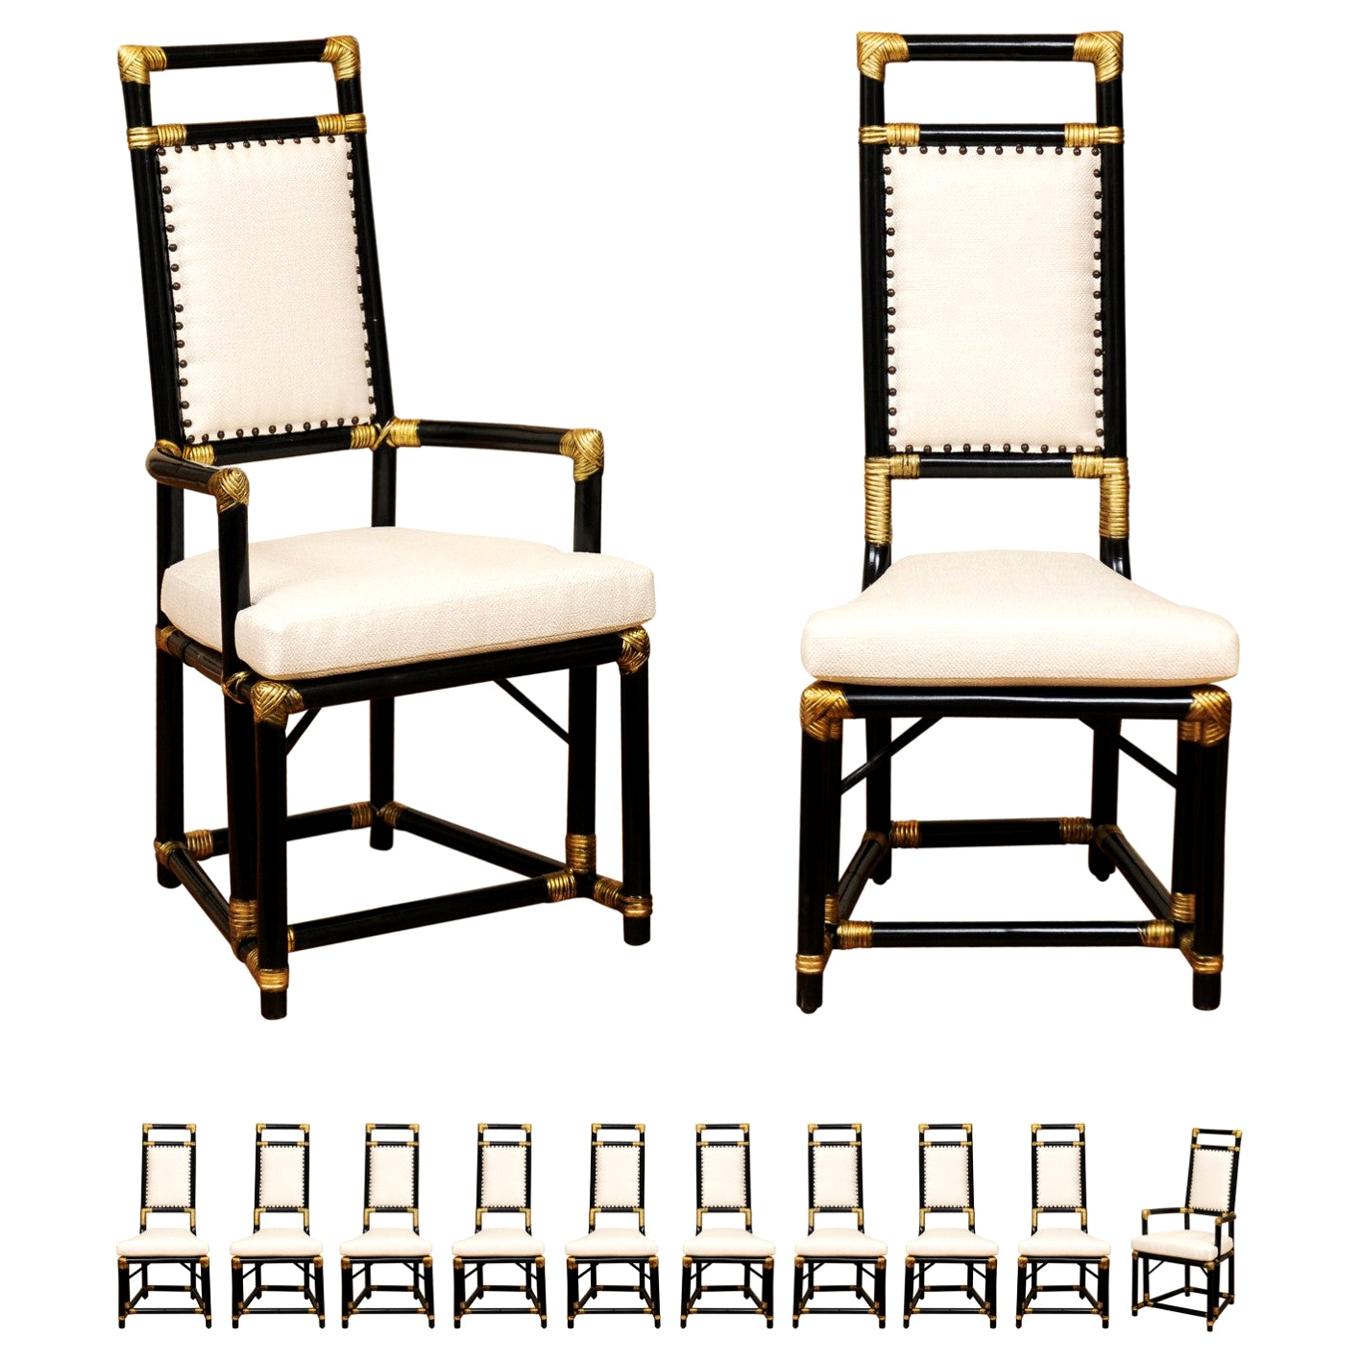 Henry Olko Dining Room Chairs